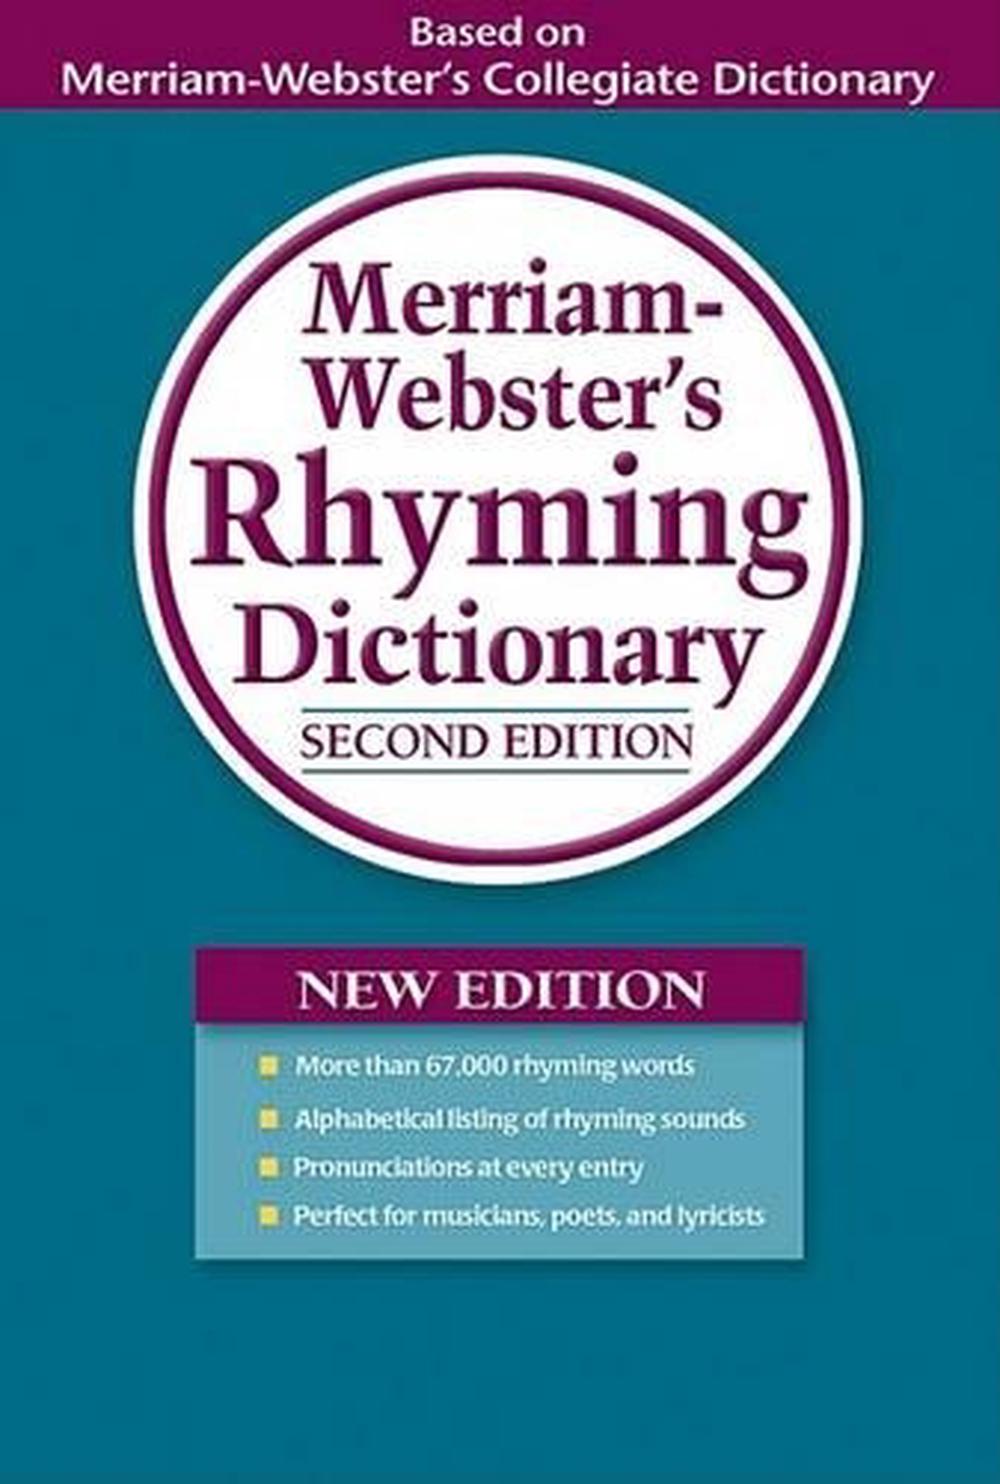 Rhyming Dictionary. Словарь Merriam-Webster. Webster's New World College Dictionary. Ppt about Merriam Webster Dictionary. Two dictionary